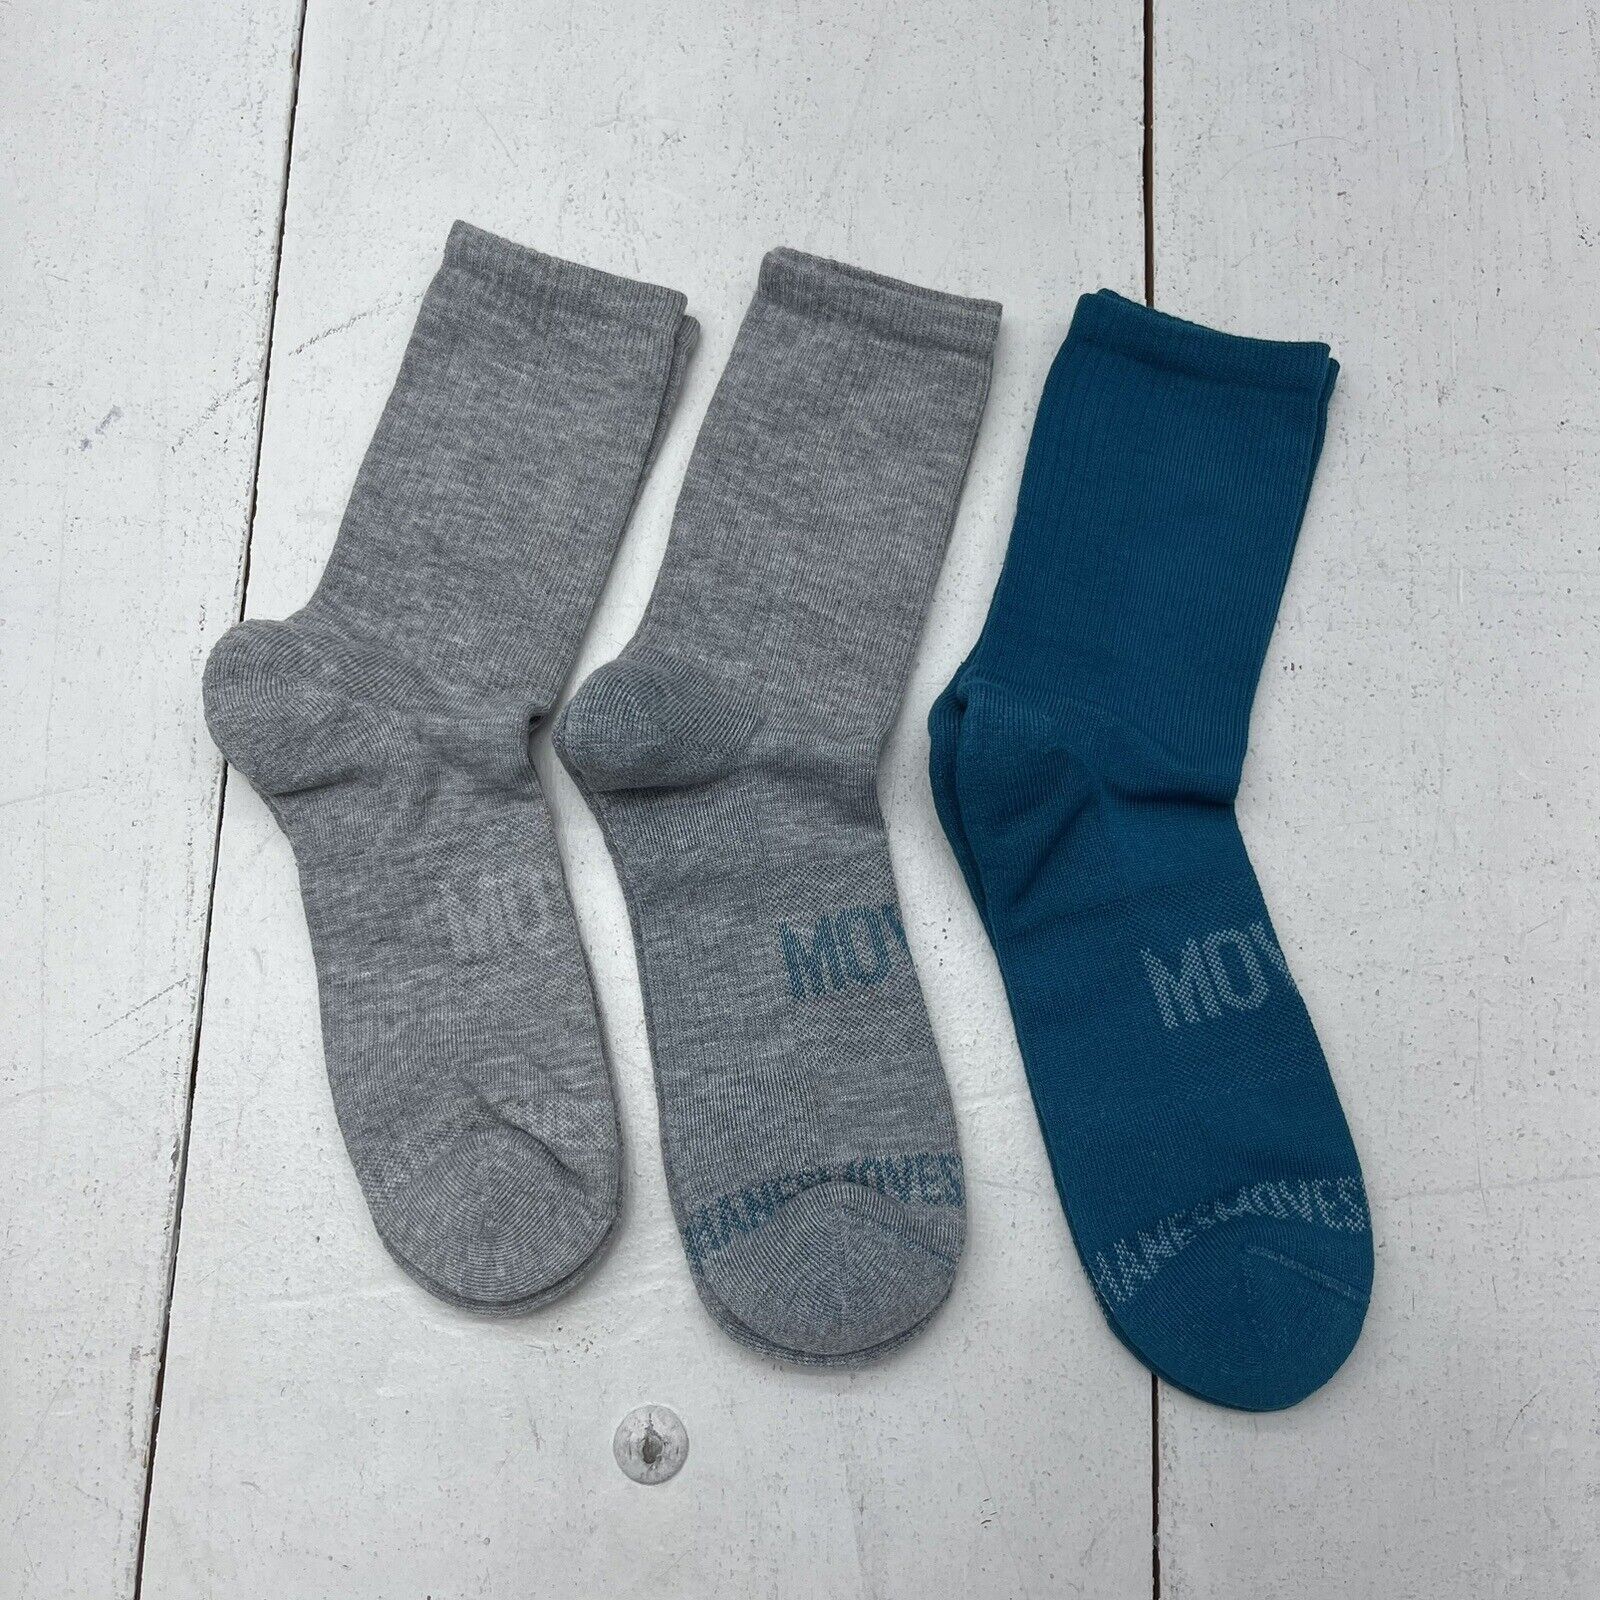 Hanes Moves 3 Pack Grey & Teal Crew Socks Men’s One Size NEW